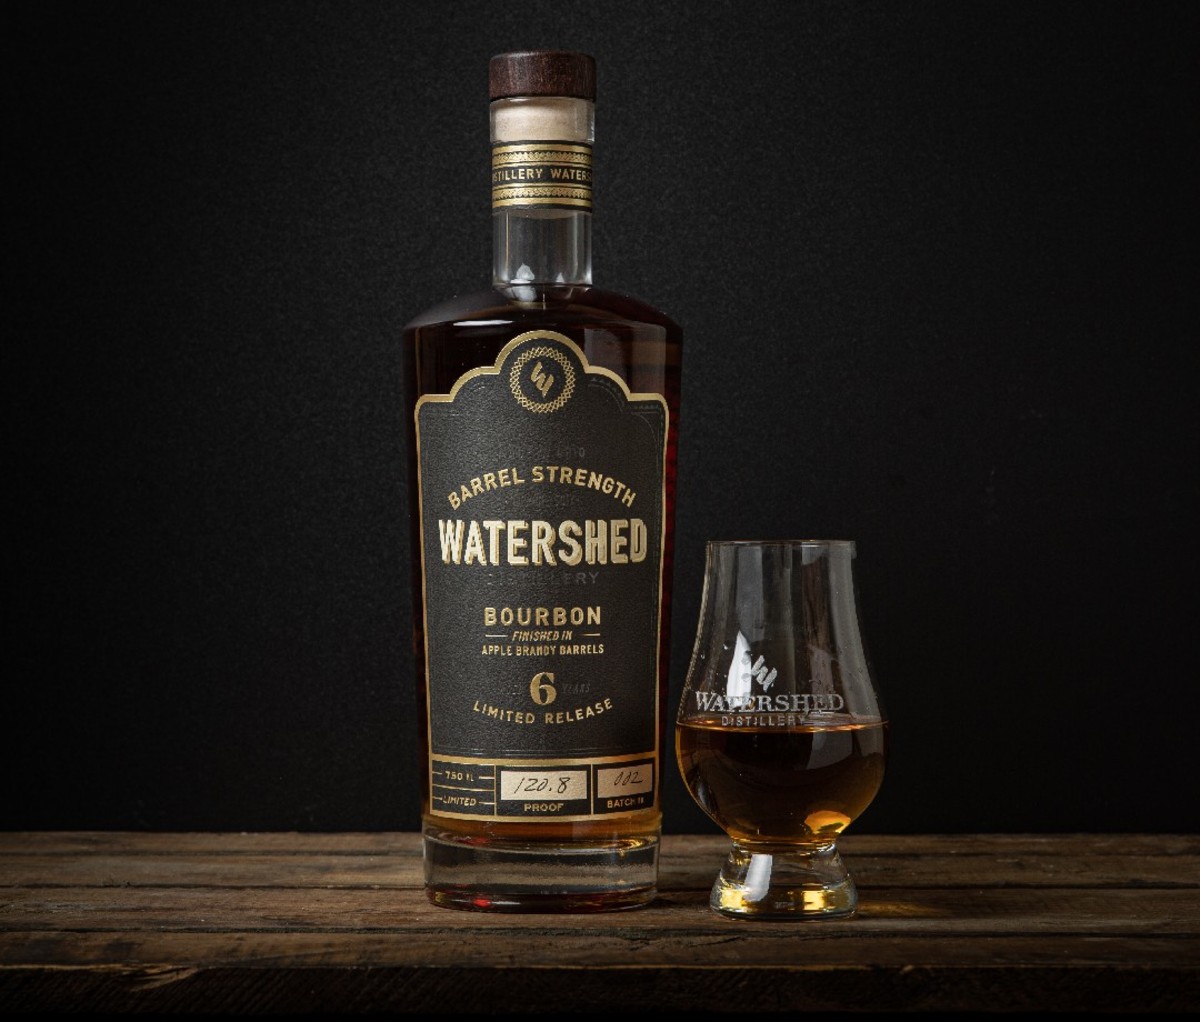 Bottle of Watershed Barrel-Strength Apple Brandy-Finished Bourbon beside a snifter of whiskey on a wooden table